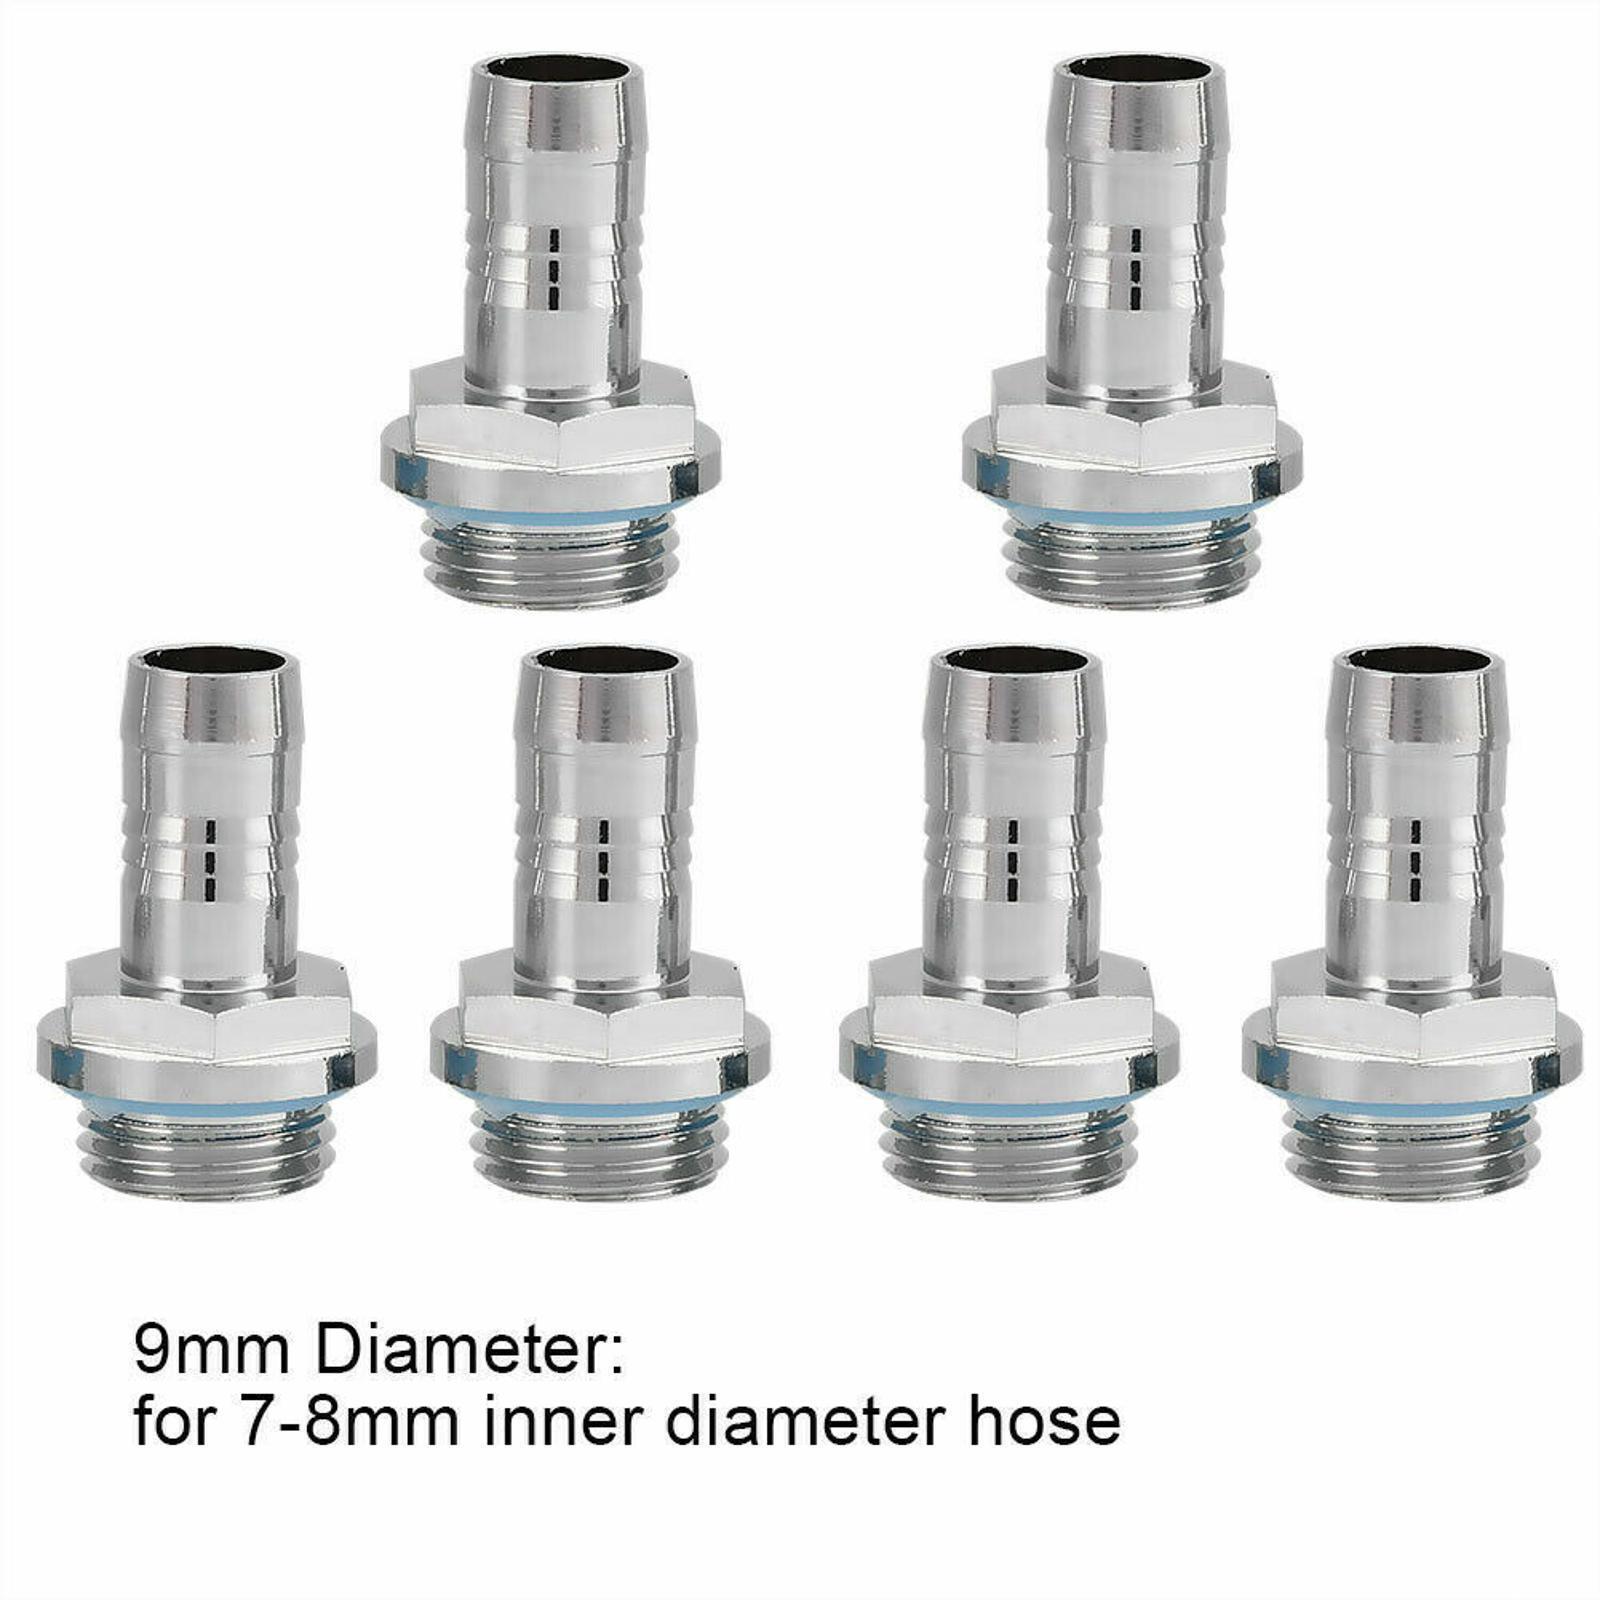 6pcs Connector G1/4 Thread Barb Water Cooling Fitting For ID 7-8mm Hose Tube